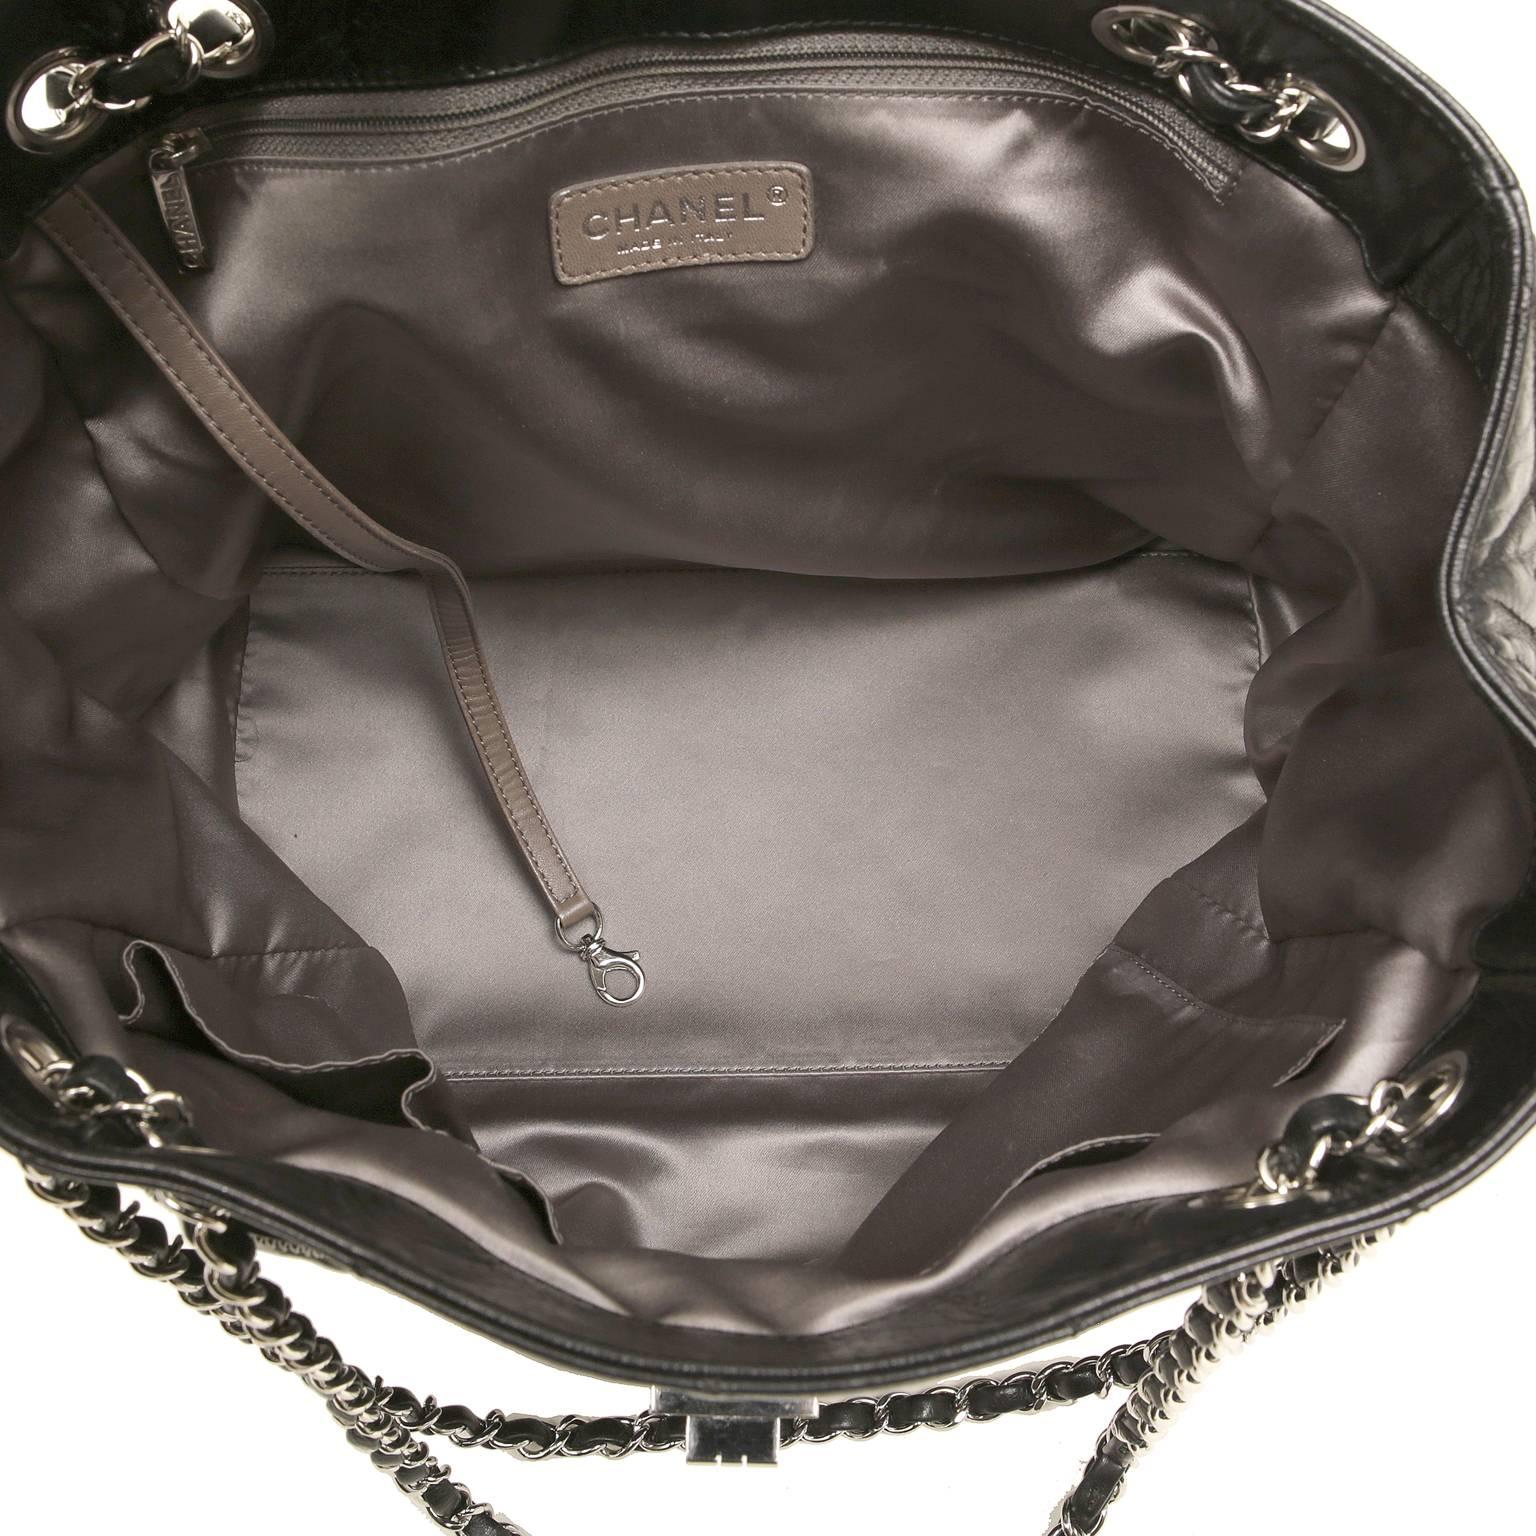 Chanel Black Leather Mademoiselle Flap Tote Bag 3